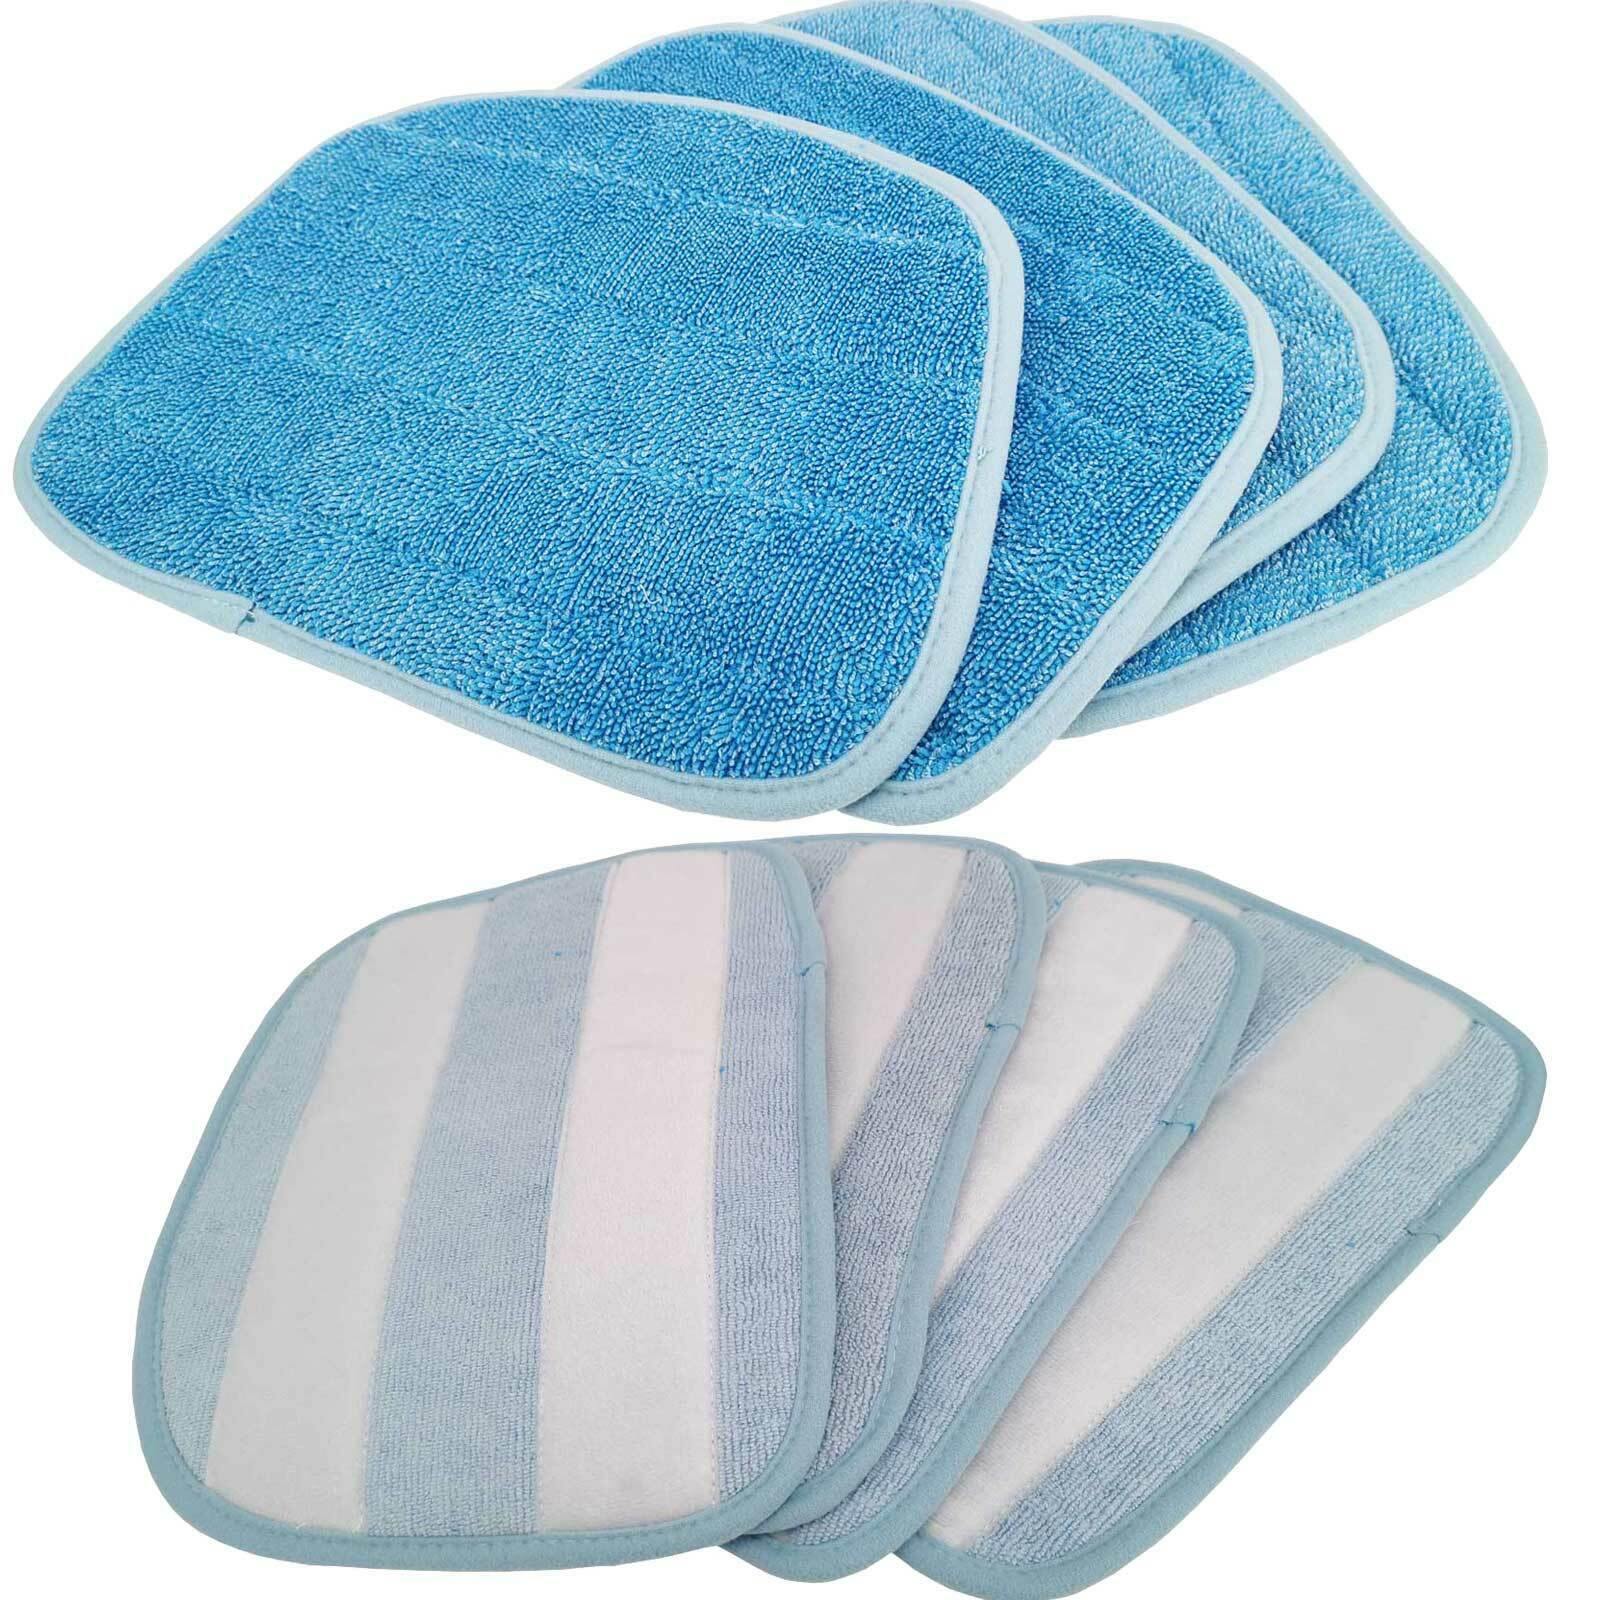 4-8 Replacement For Steam Mop Pads Micro Fibre Clothes Floors Cleaner Washable Sparesbarn